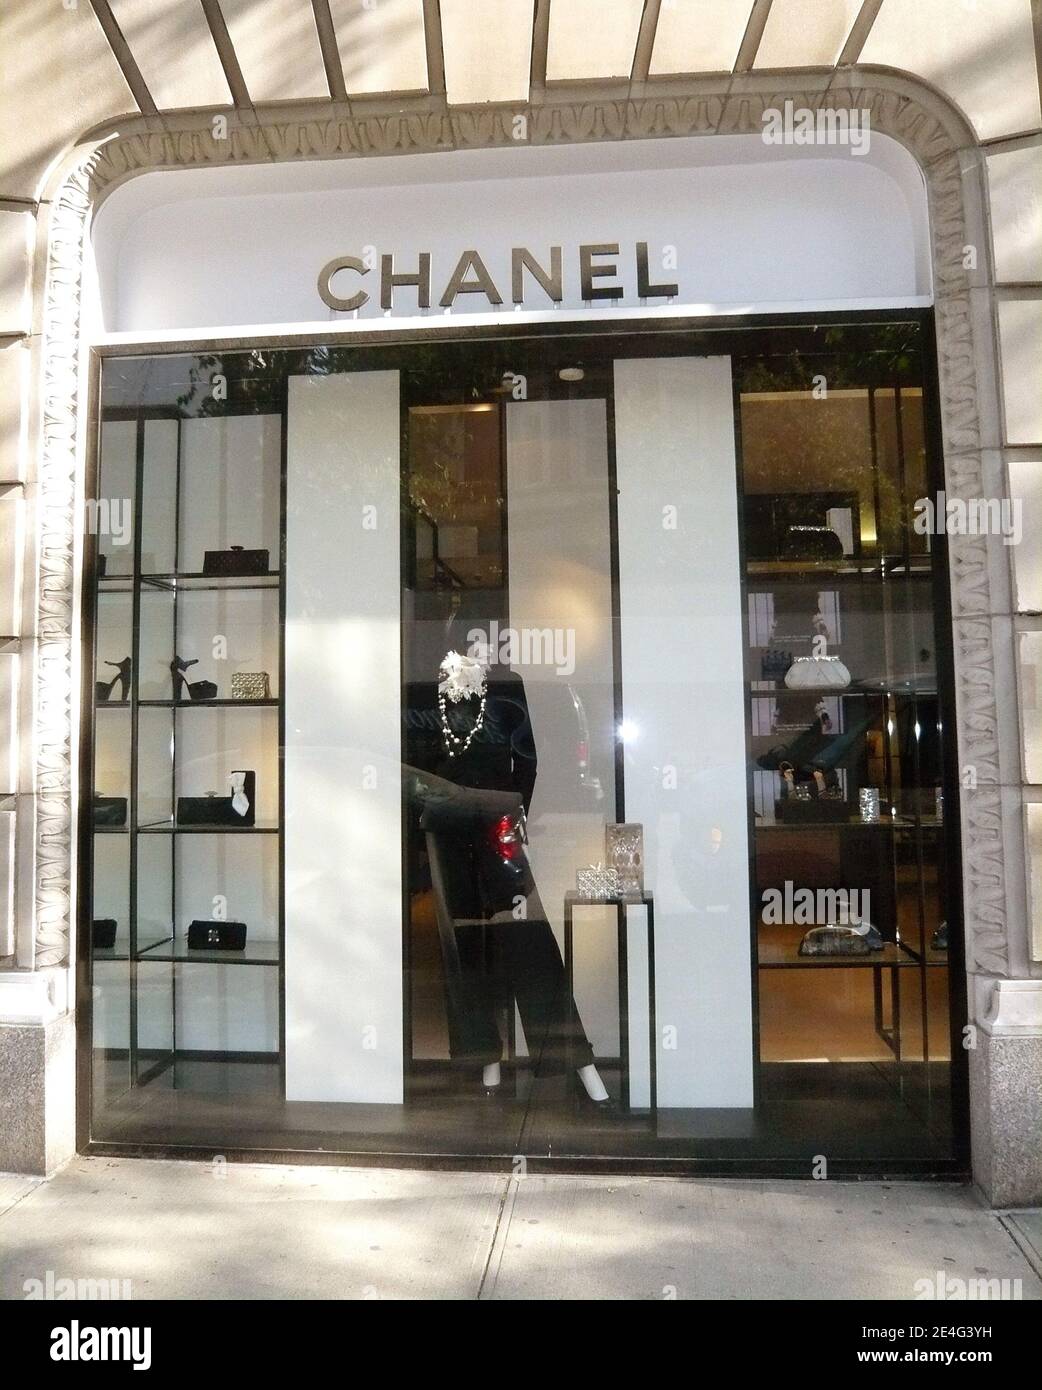 Chanel Store - NYC 57th Street  Chanel store nyc, Chanel boutique, Chanel